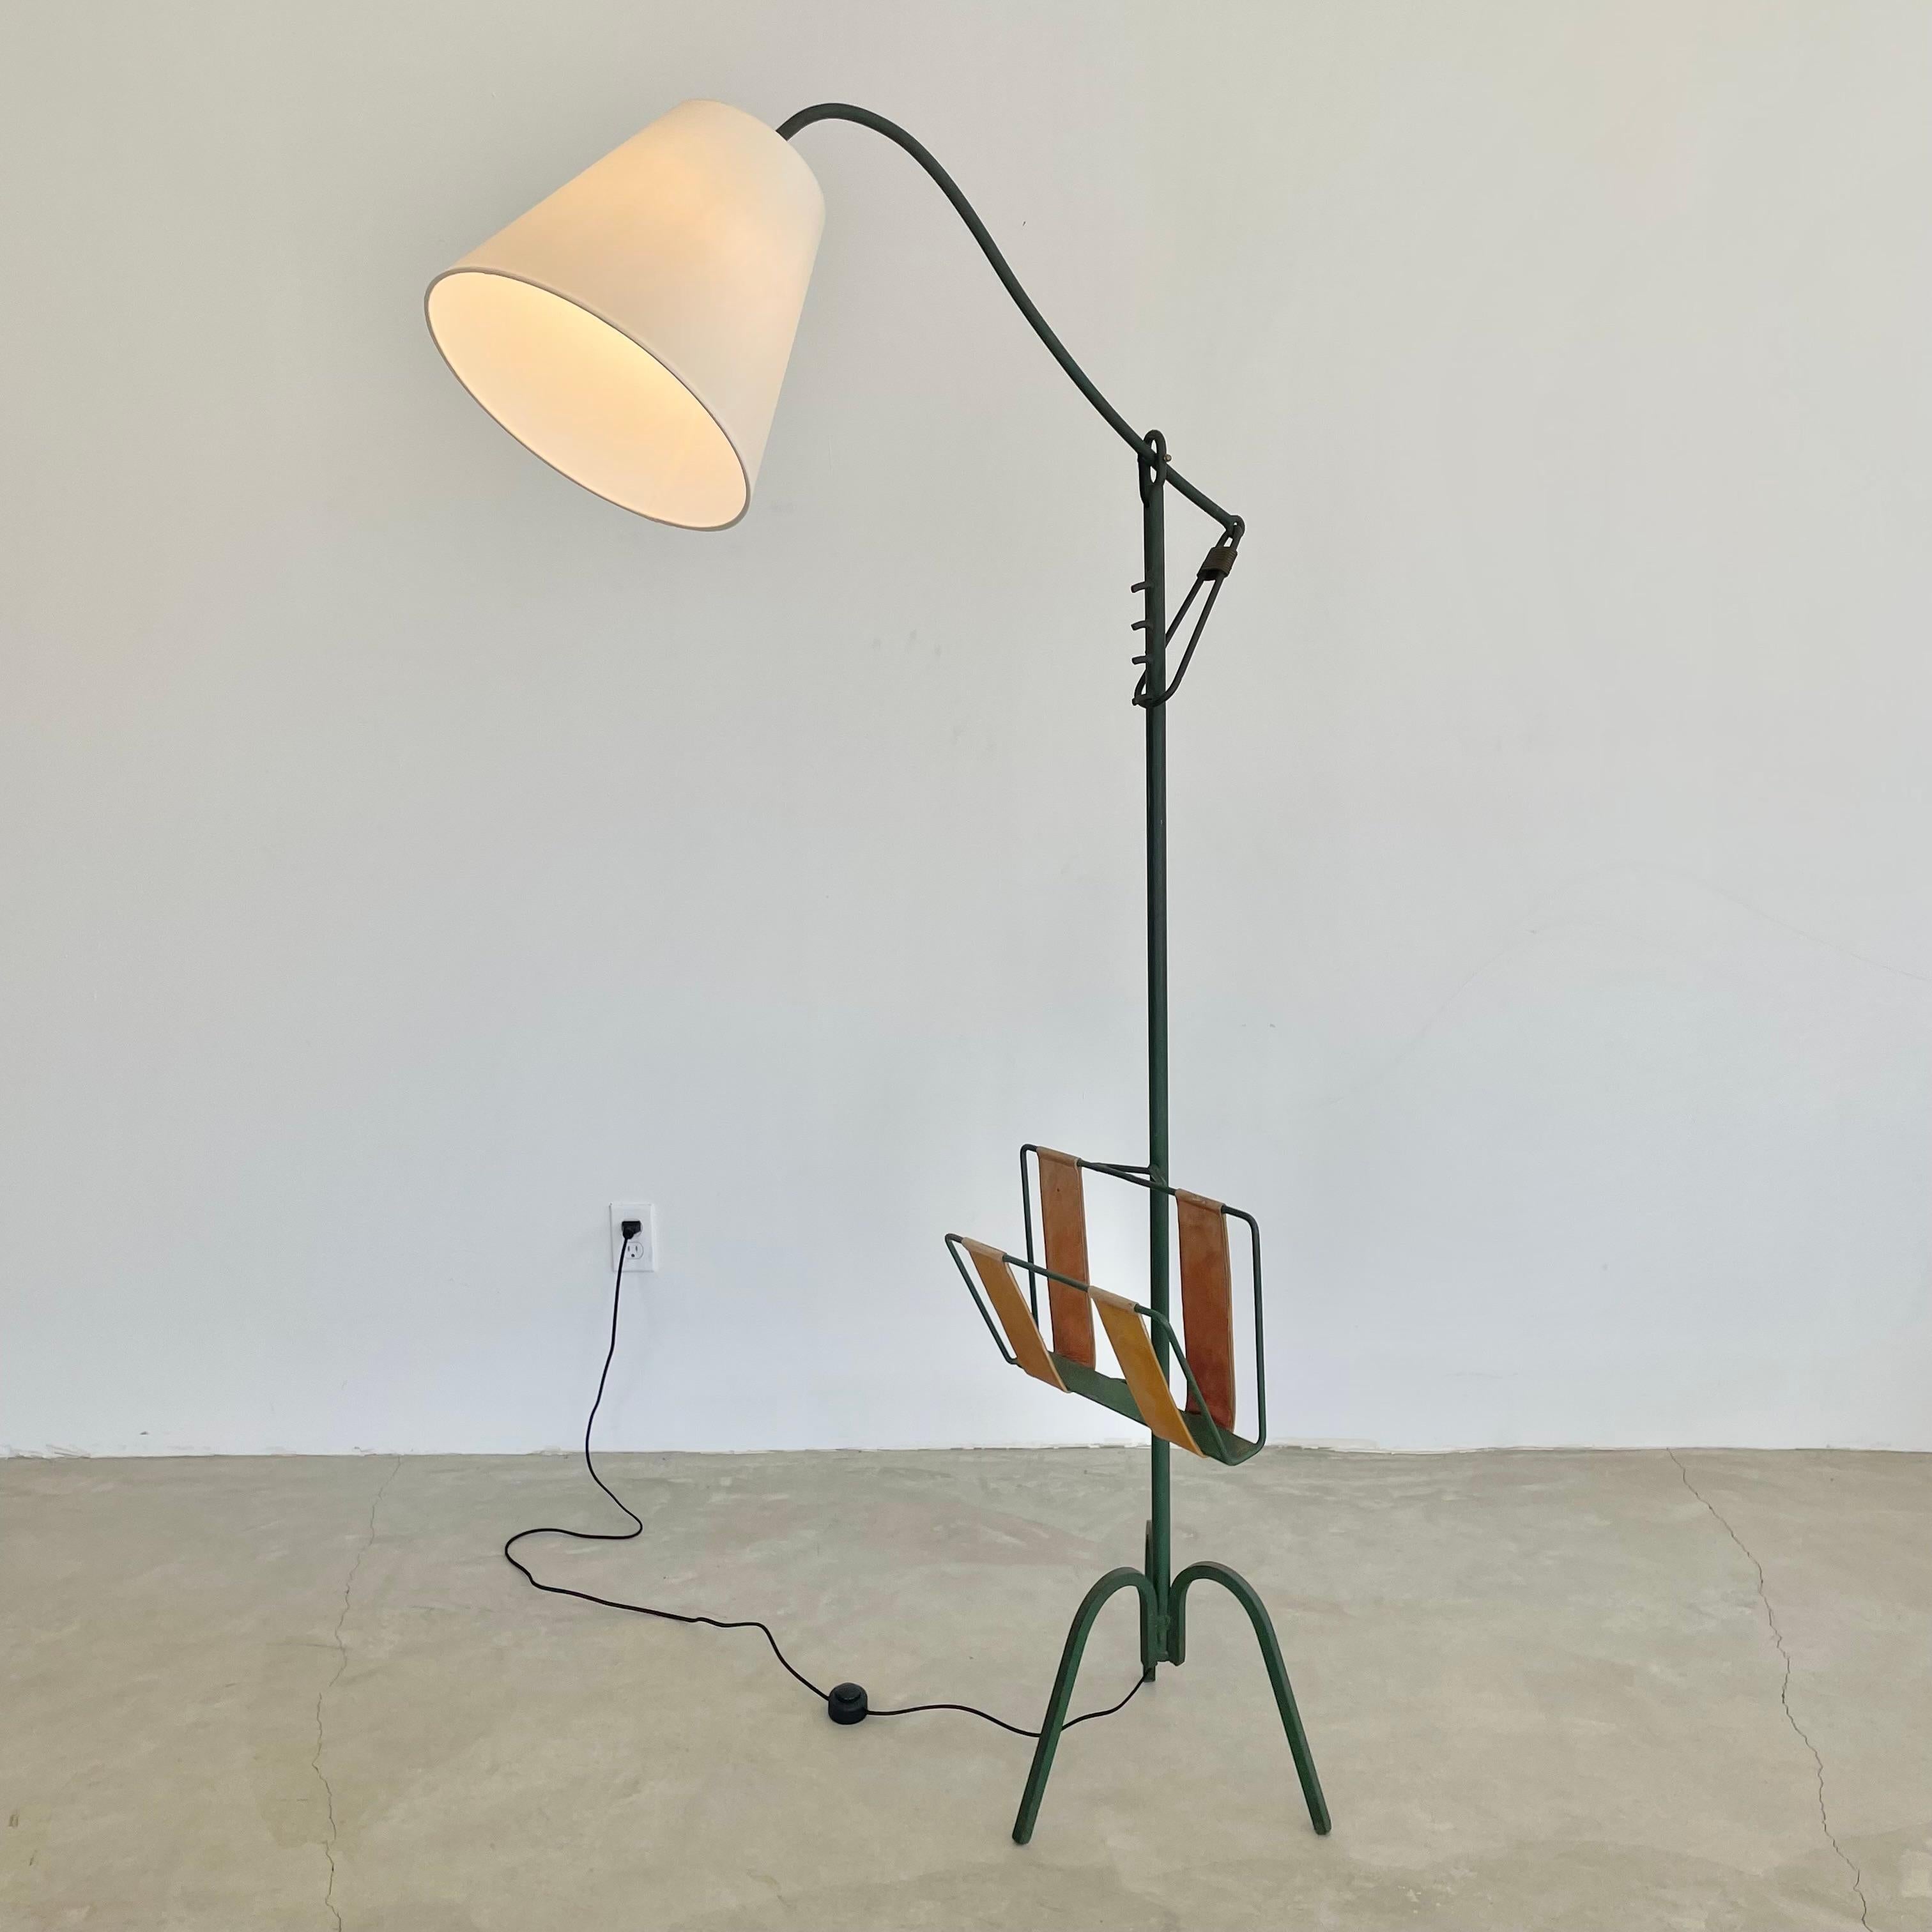 Incredible iron cantilever floor lamp in a deep green paint by French designer Jacques Adnet. Great sculptural lamp from all angles. The middle quarter of the lamp features a beautiful magazine rack in iron with saddle leather strap accents. A